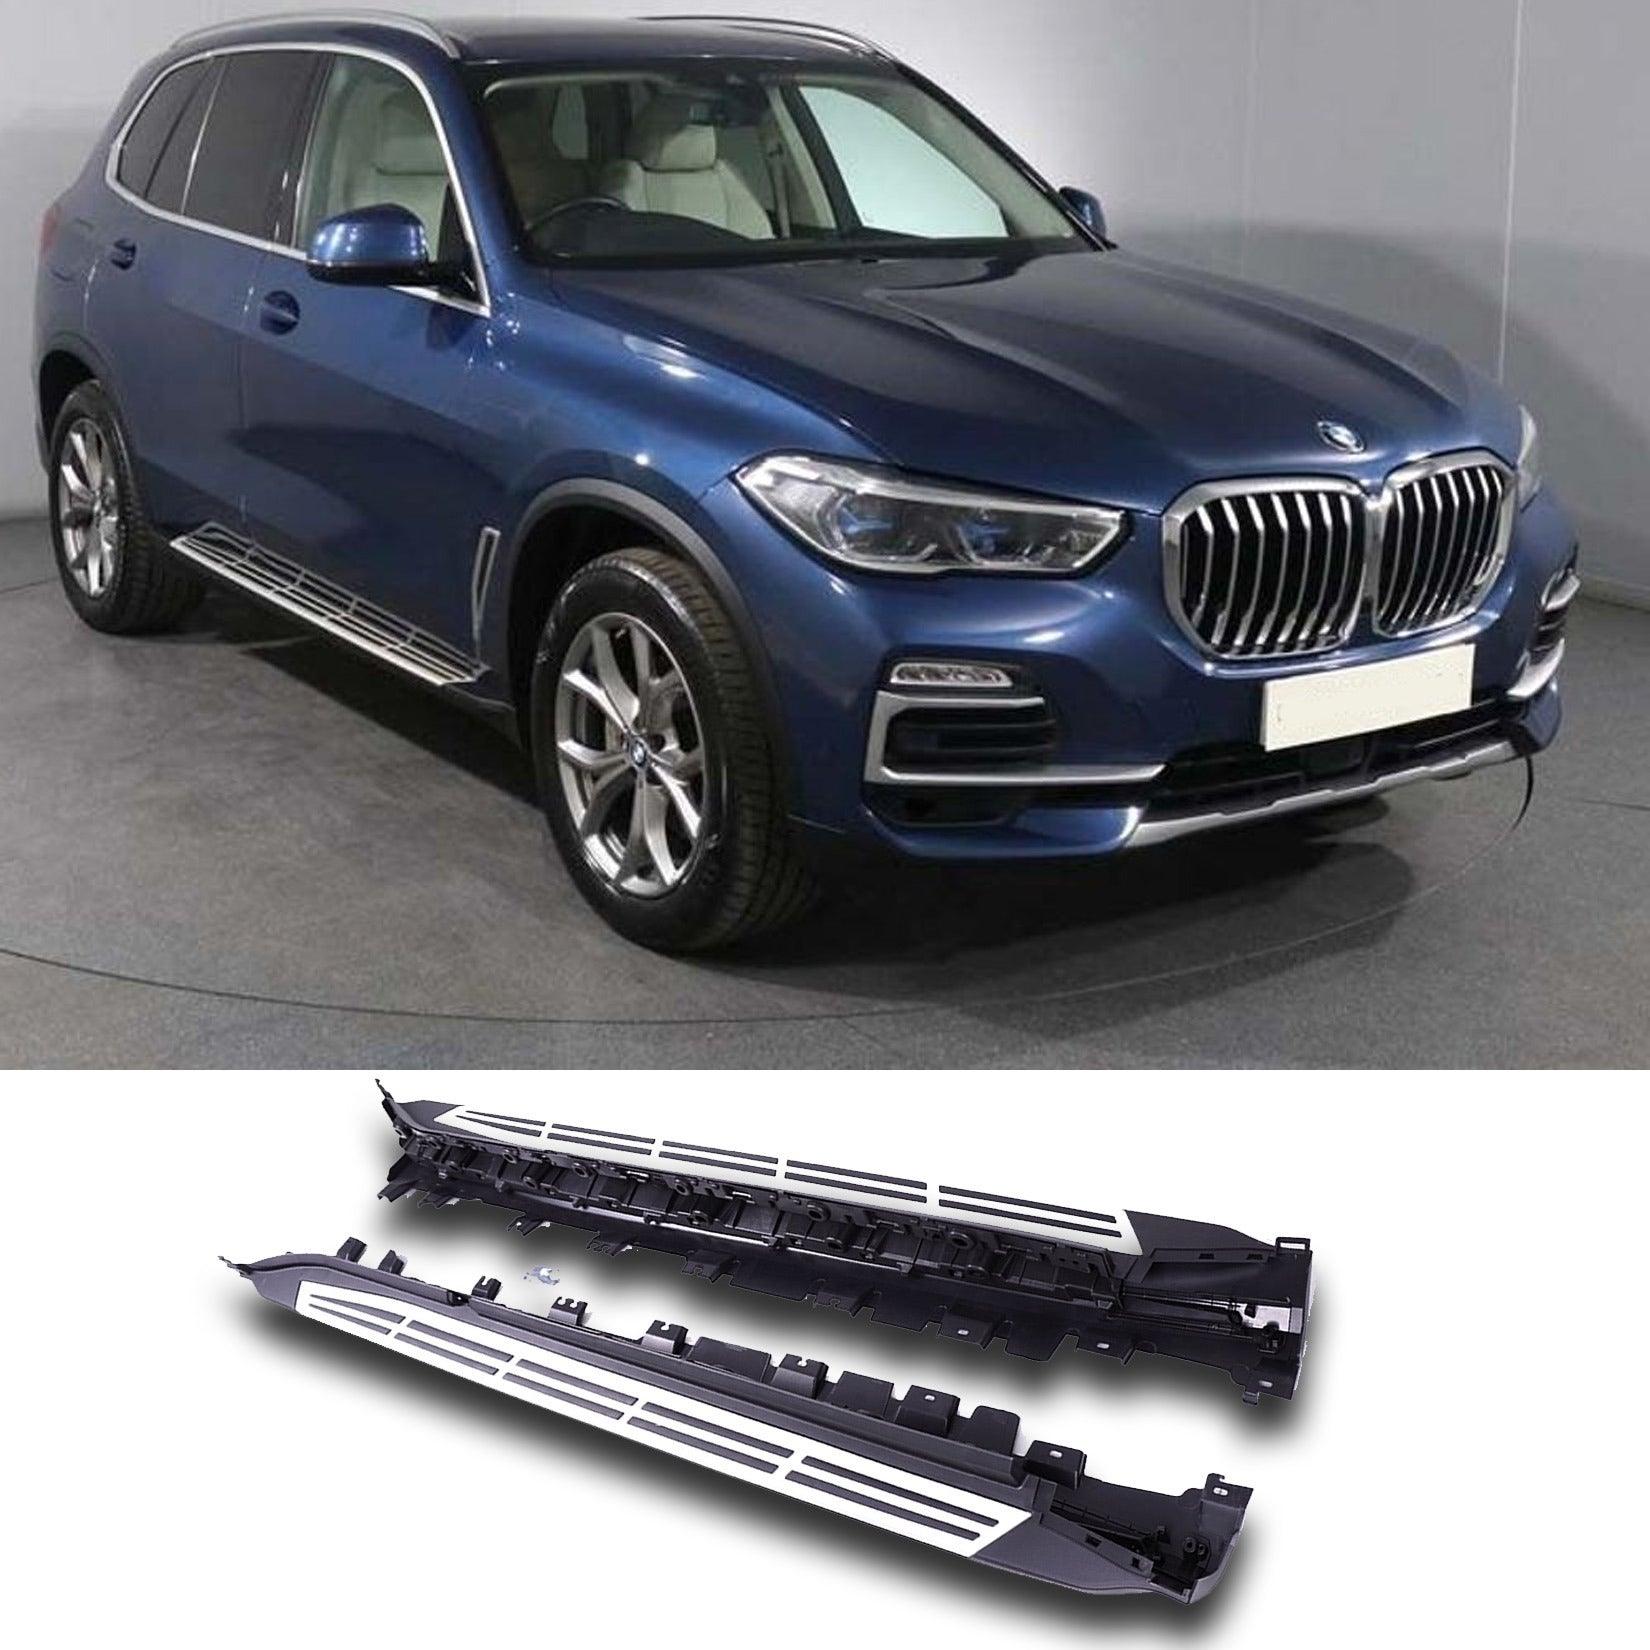 BMW X5 G05 2019 ON OEM STYLE RUNNING BOARDS - SIDE STEP - PAIR - Storm Xccessories2